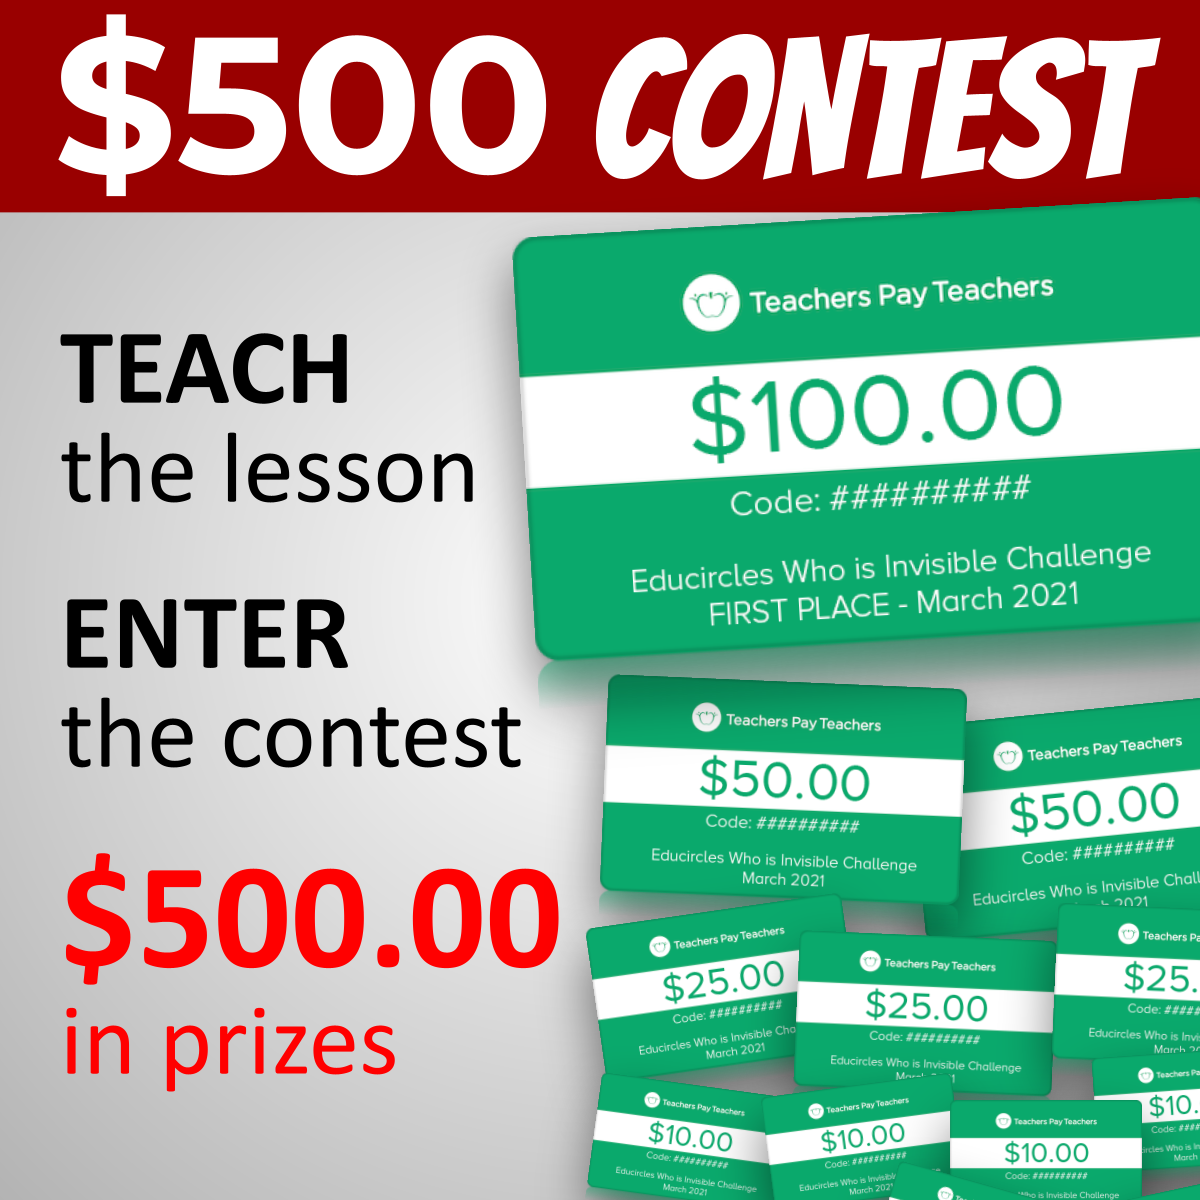 Diversity Lesson Who is Invisible Challenge - $500 contest: Teach the lesson, enter the contest, $500.00 in prizes